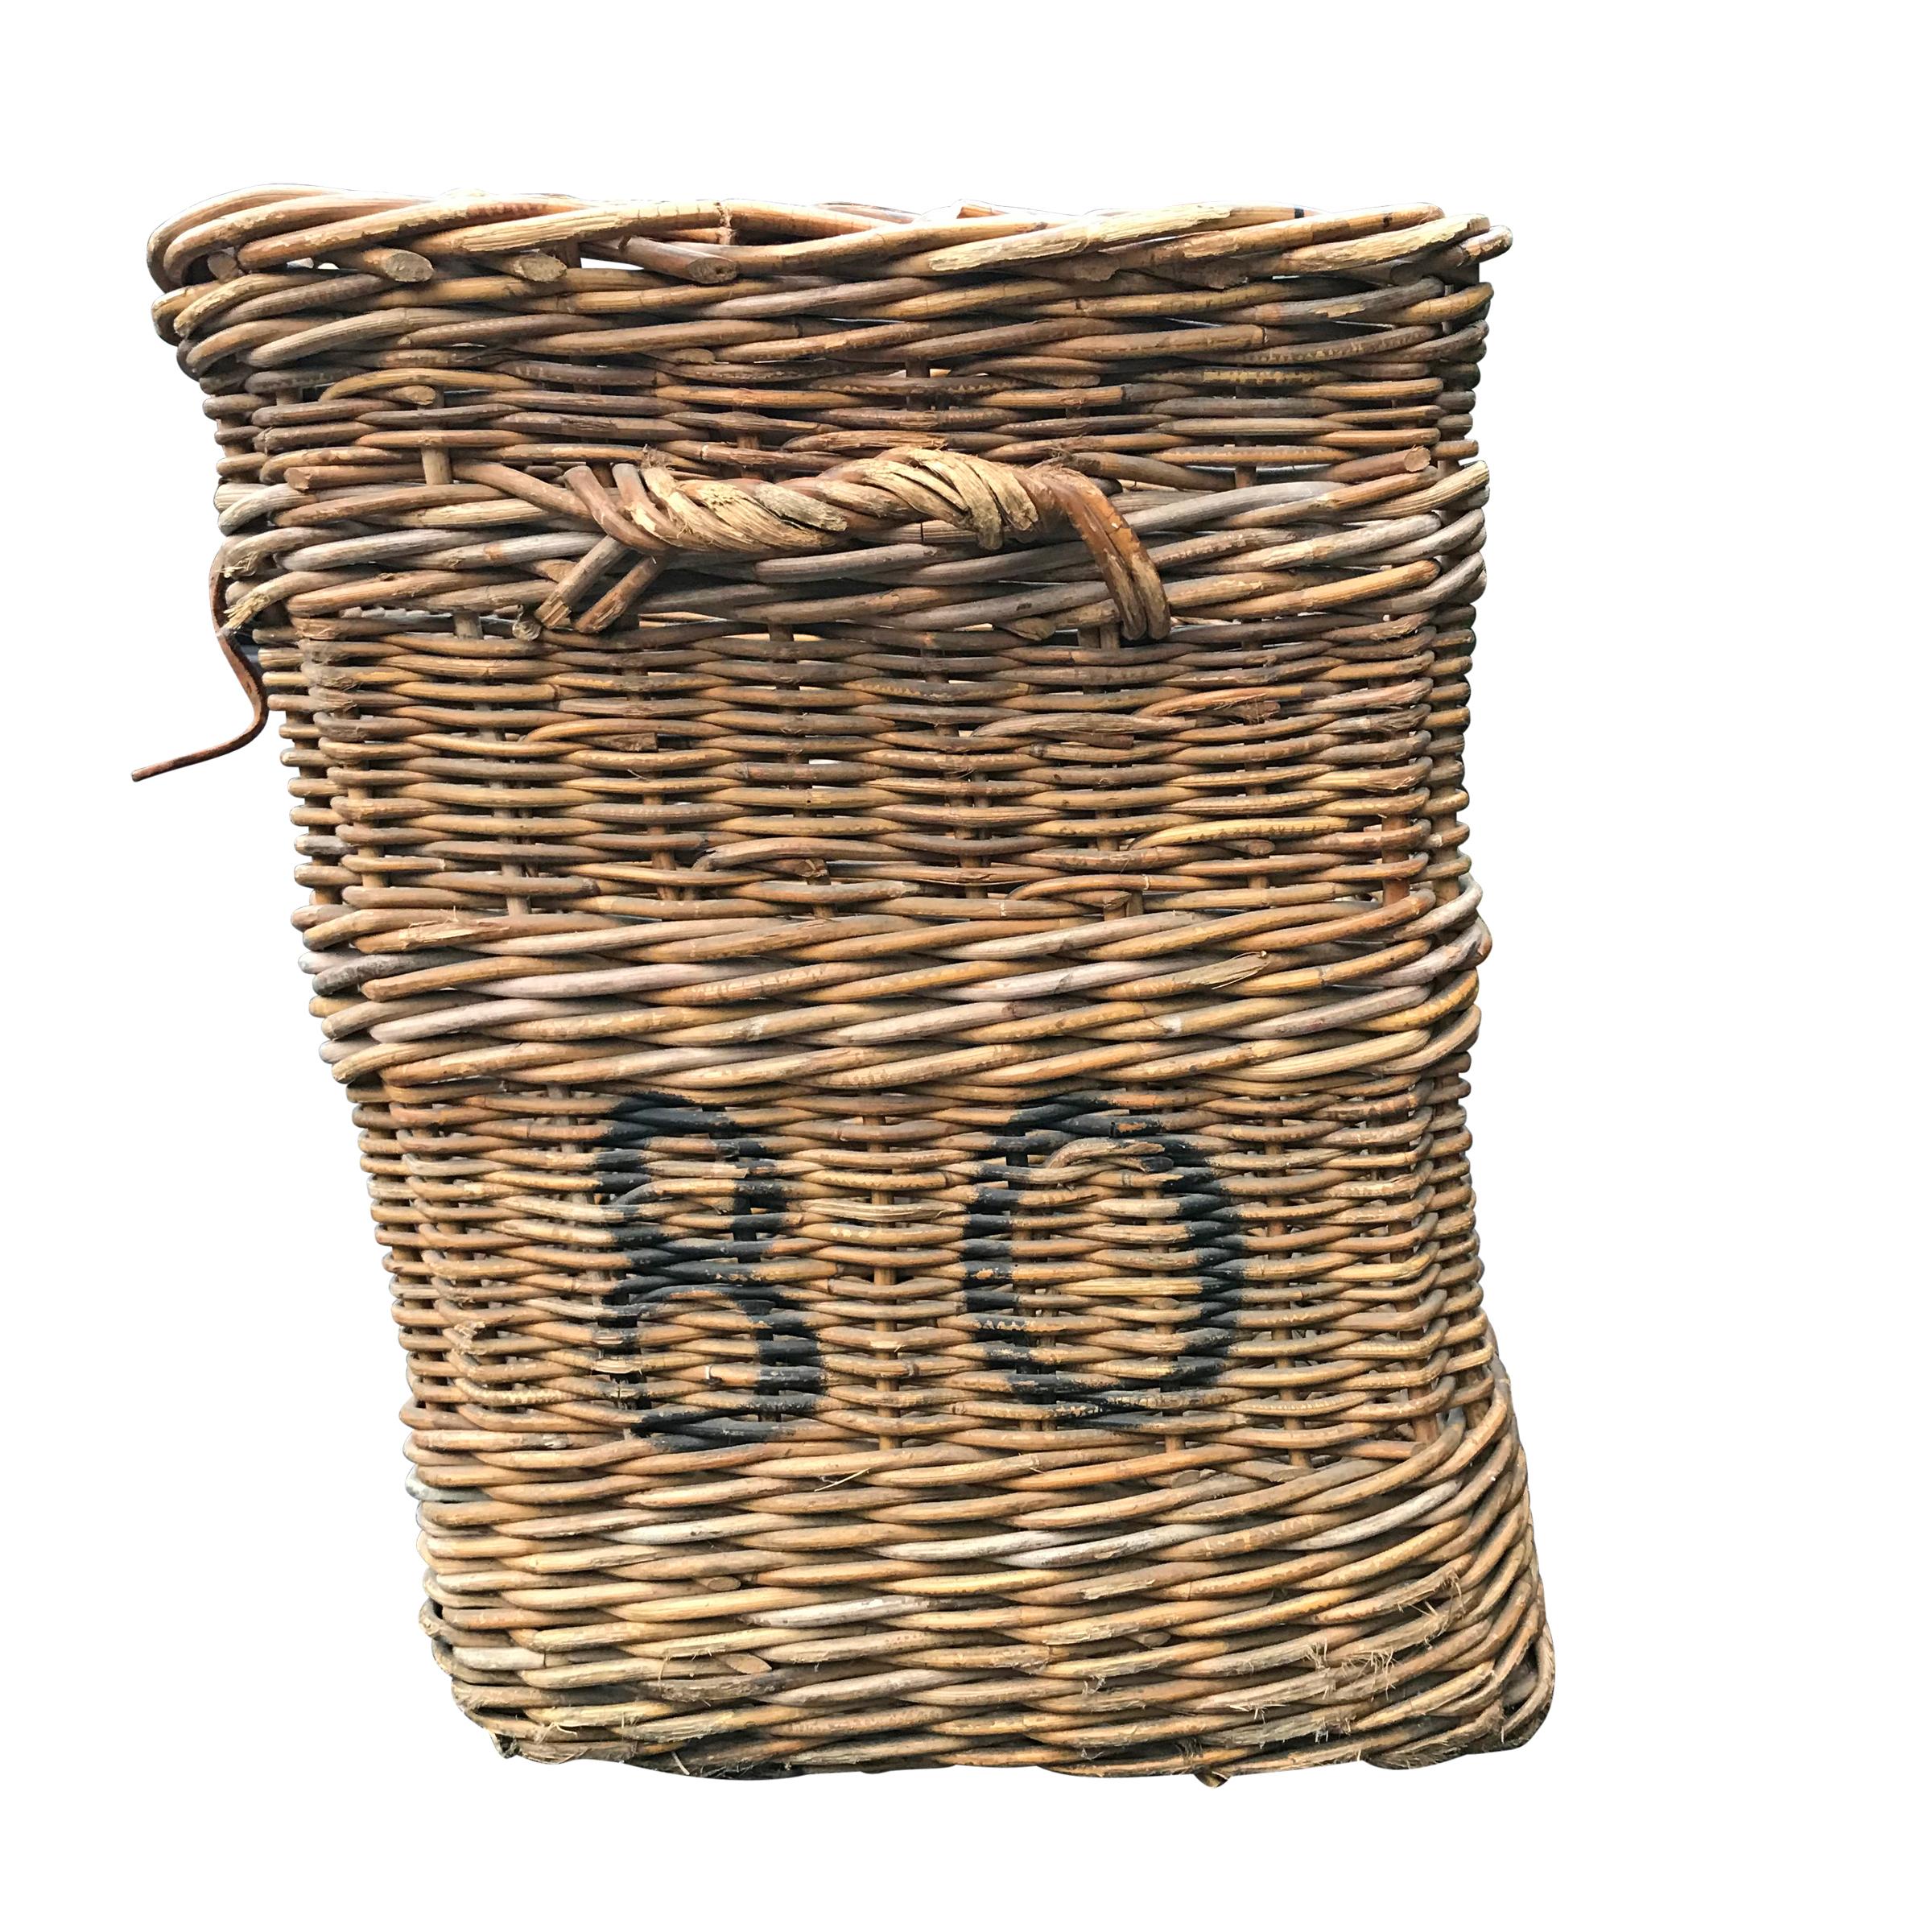 Hand-Woven Early 20th Century French Vineyard Basket